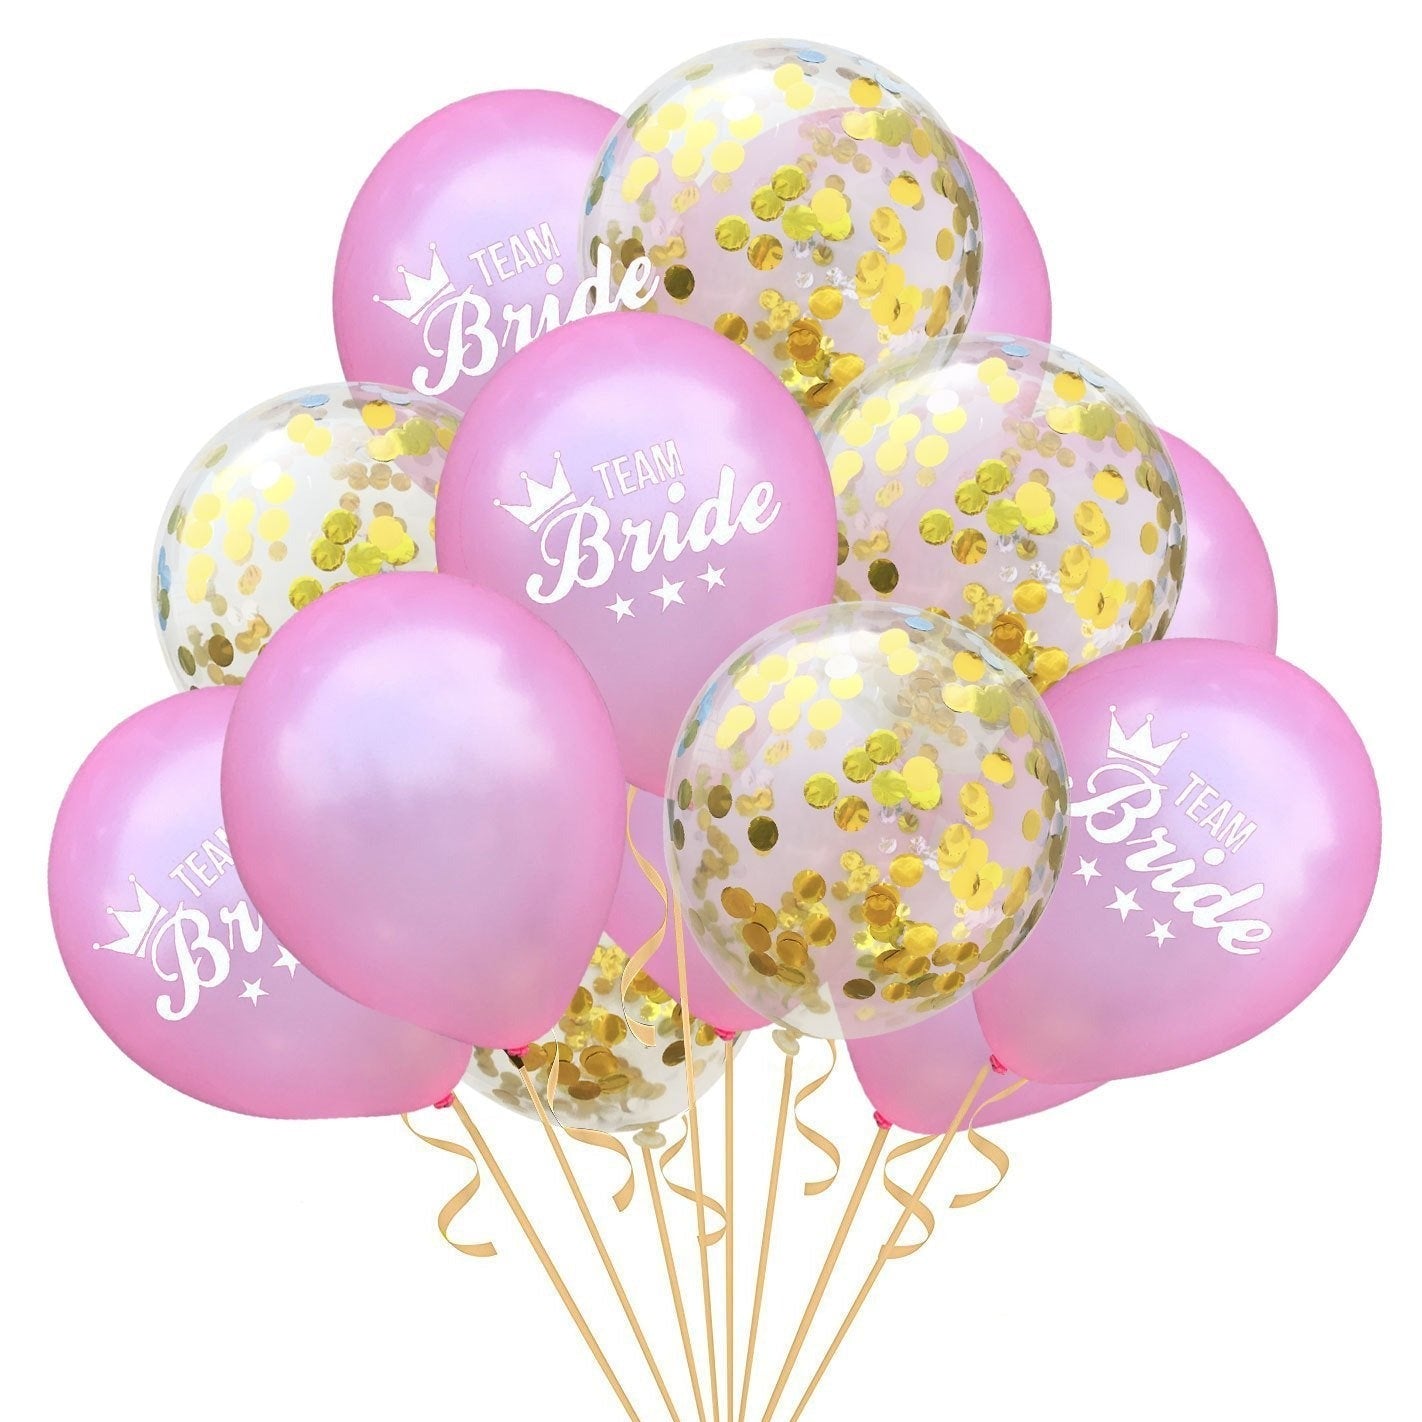 12 Inch Team Bride Pink Confetti Balloons (Pack of 15) - Online Party Supplies